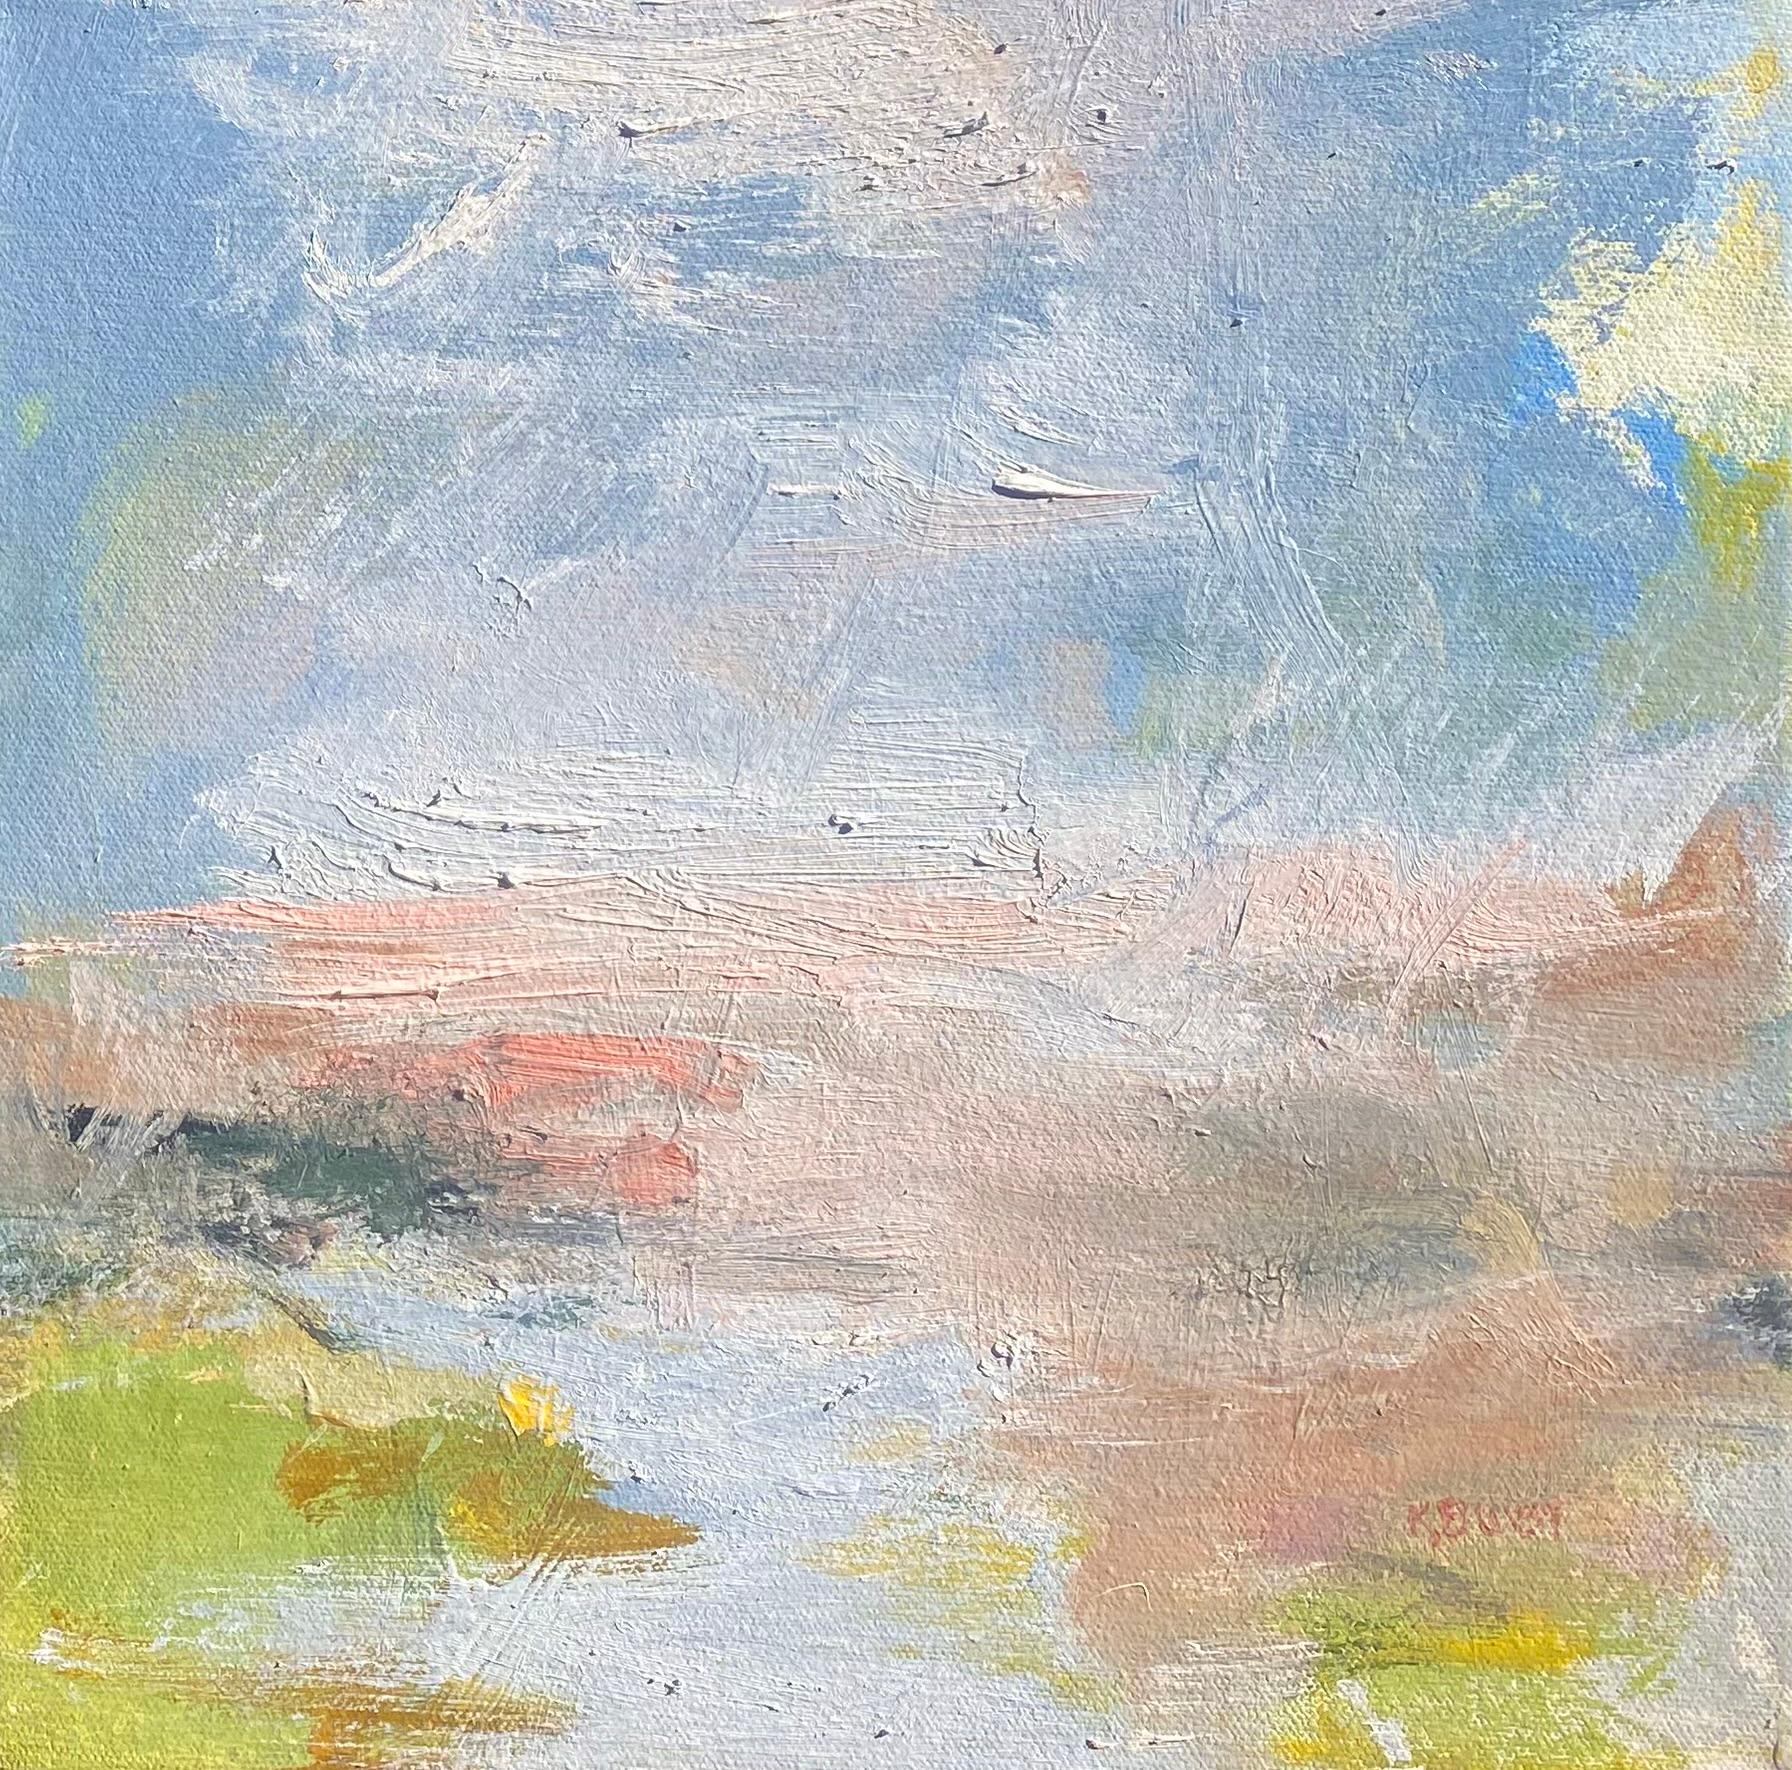 “Moving Mist” - Painting by Kathy Buist